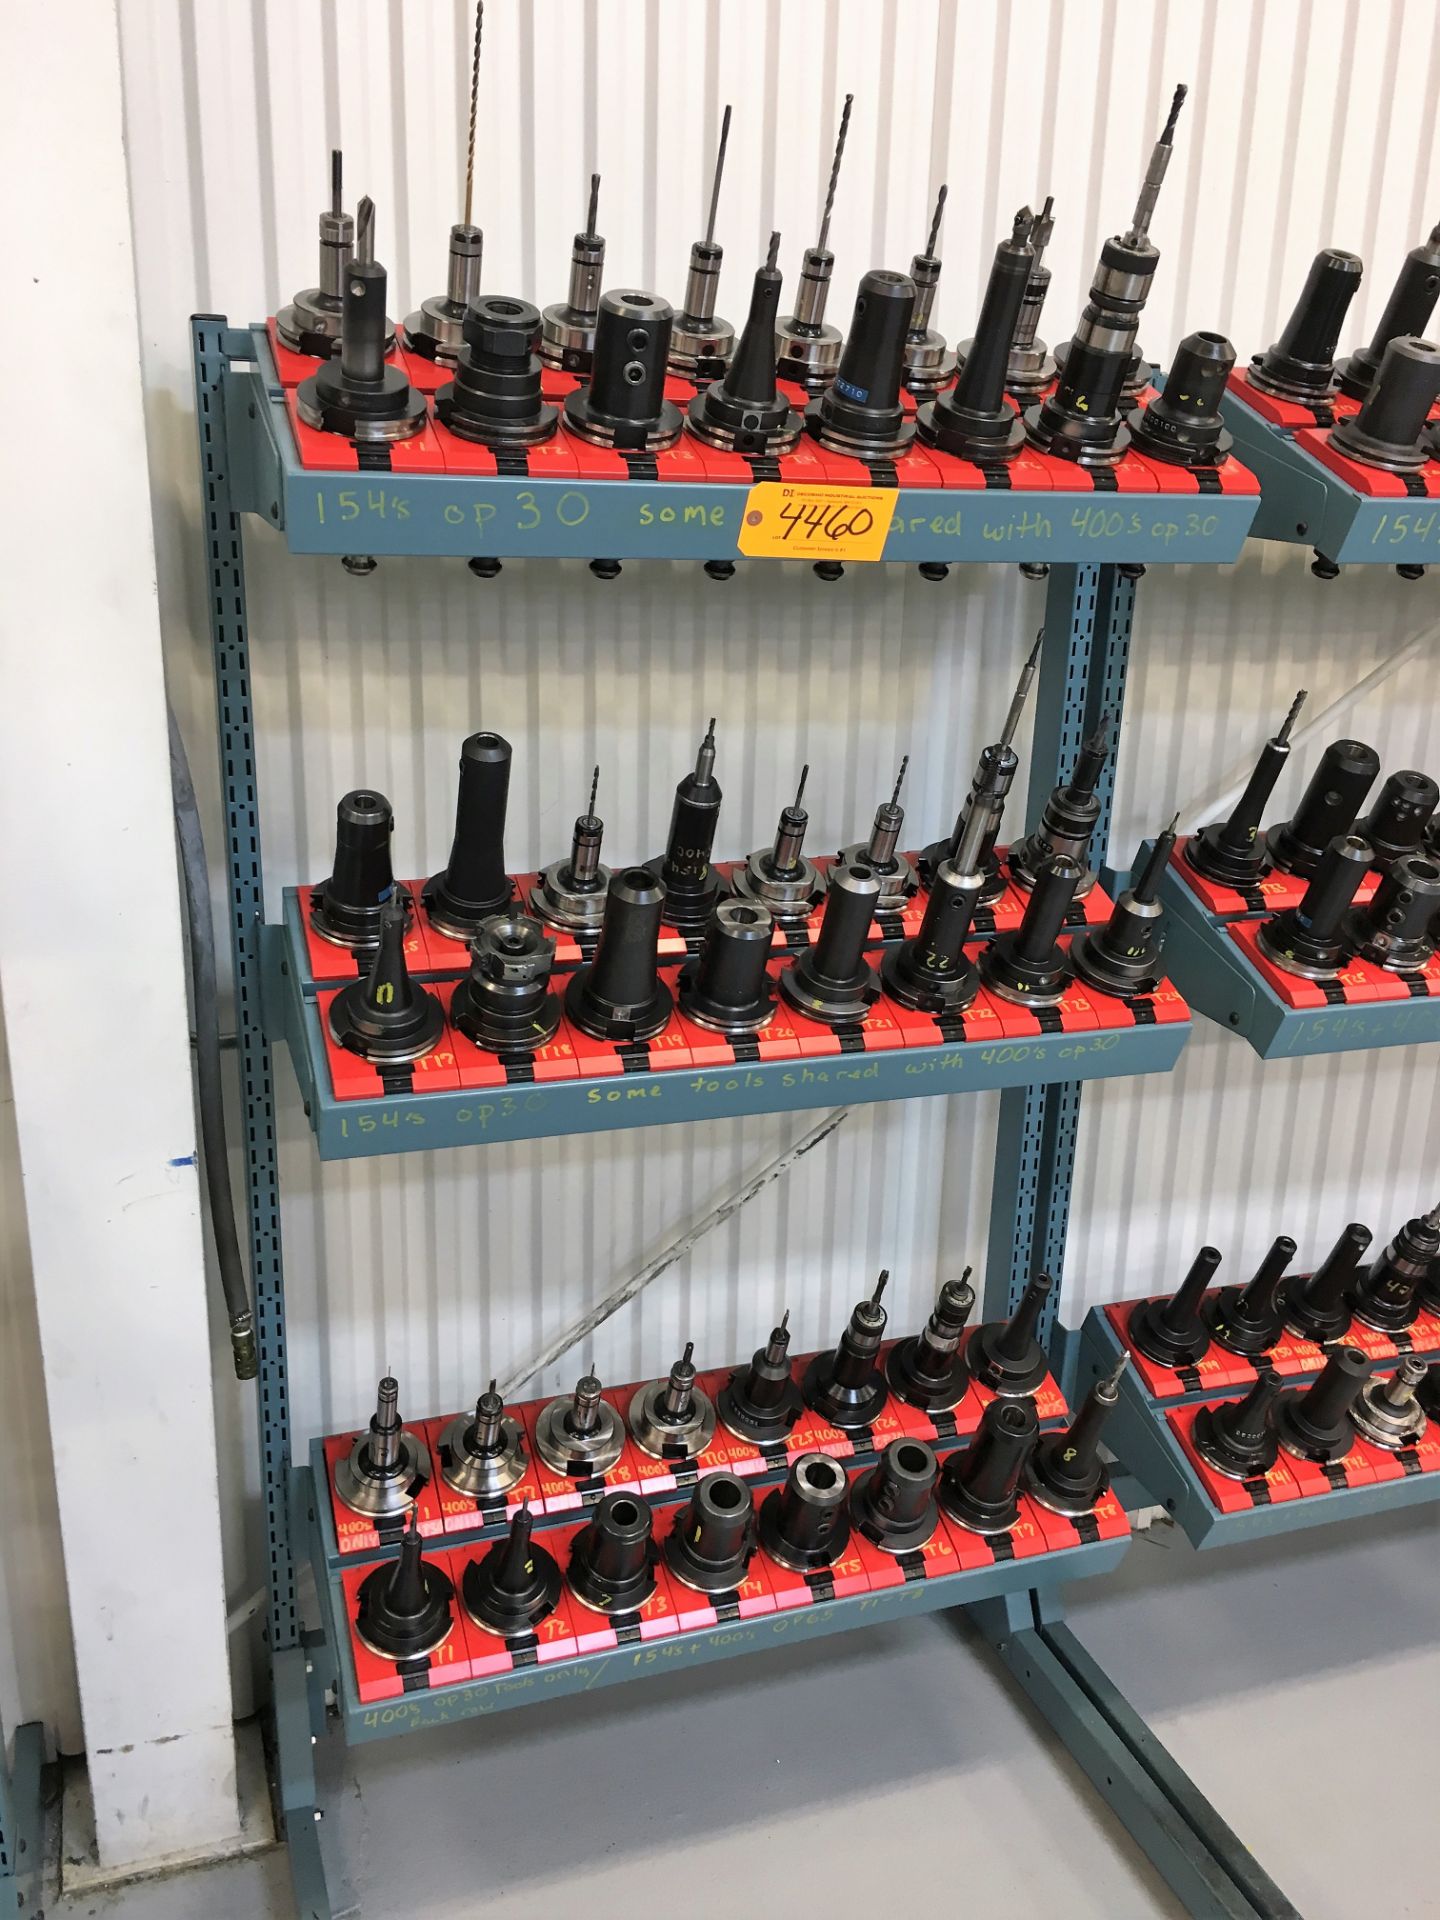 LISTA TOOL RACK WITH (48) LYNDEX-NIKKEN #CT-50 CNC TOOL HOLDERS